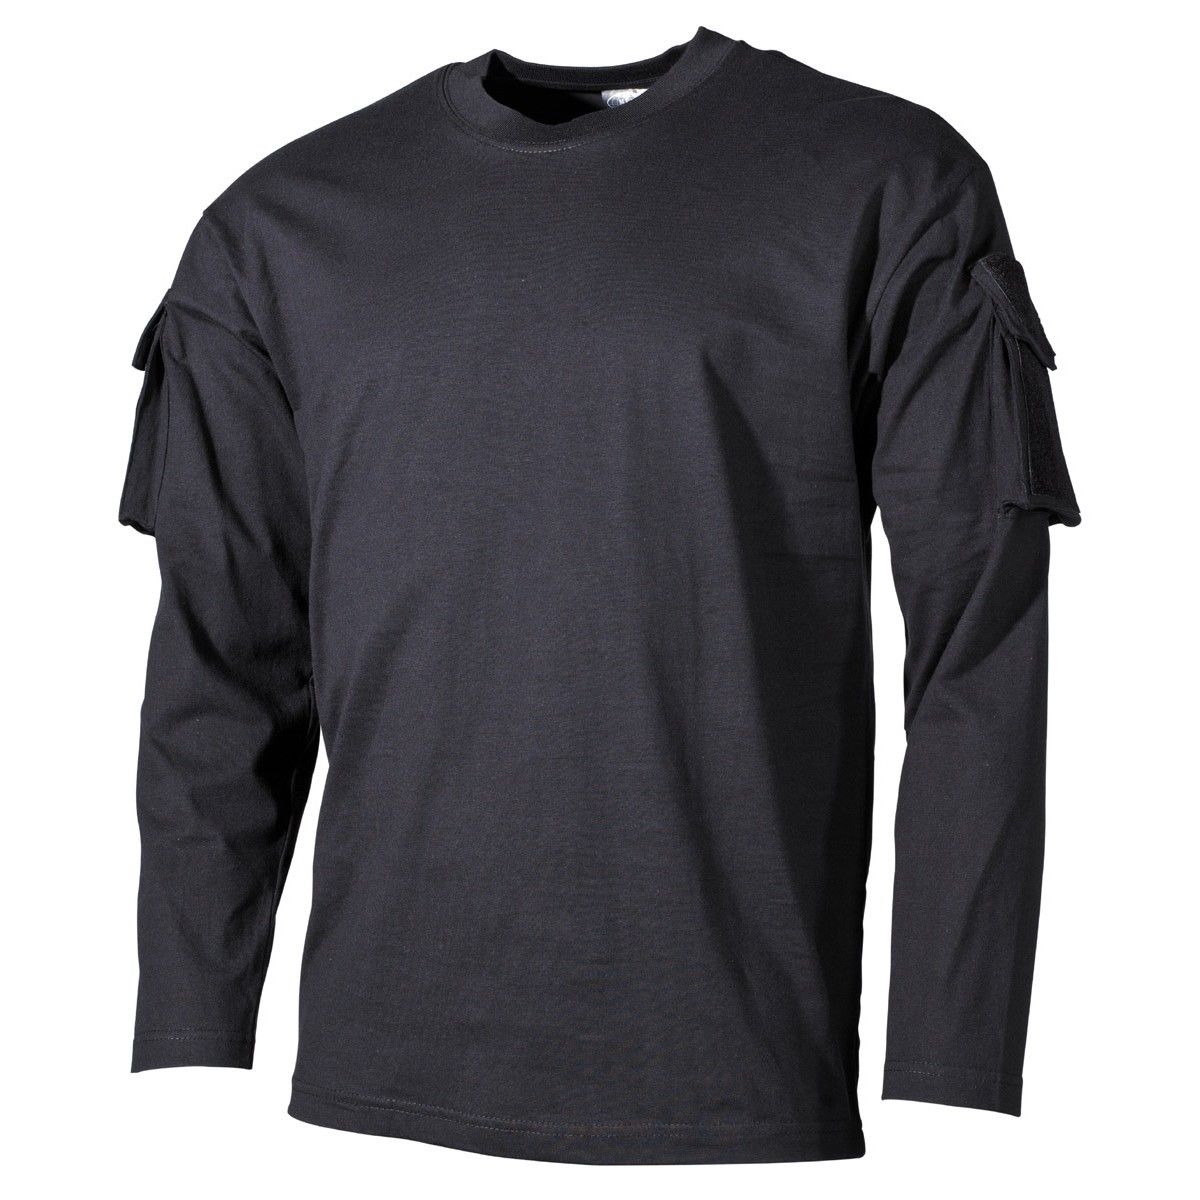 Tactical Military Army Special Ops Combat T-Shirt - Black - Long Sleeve